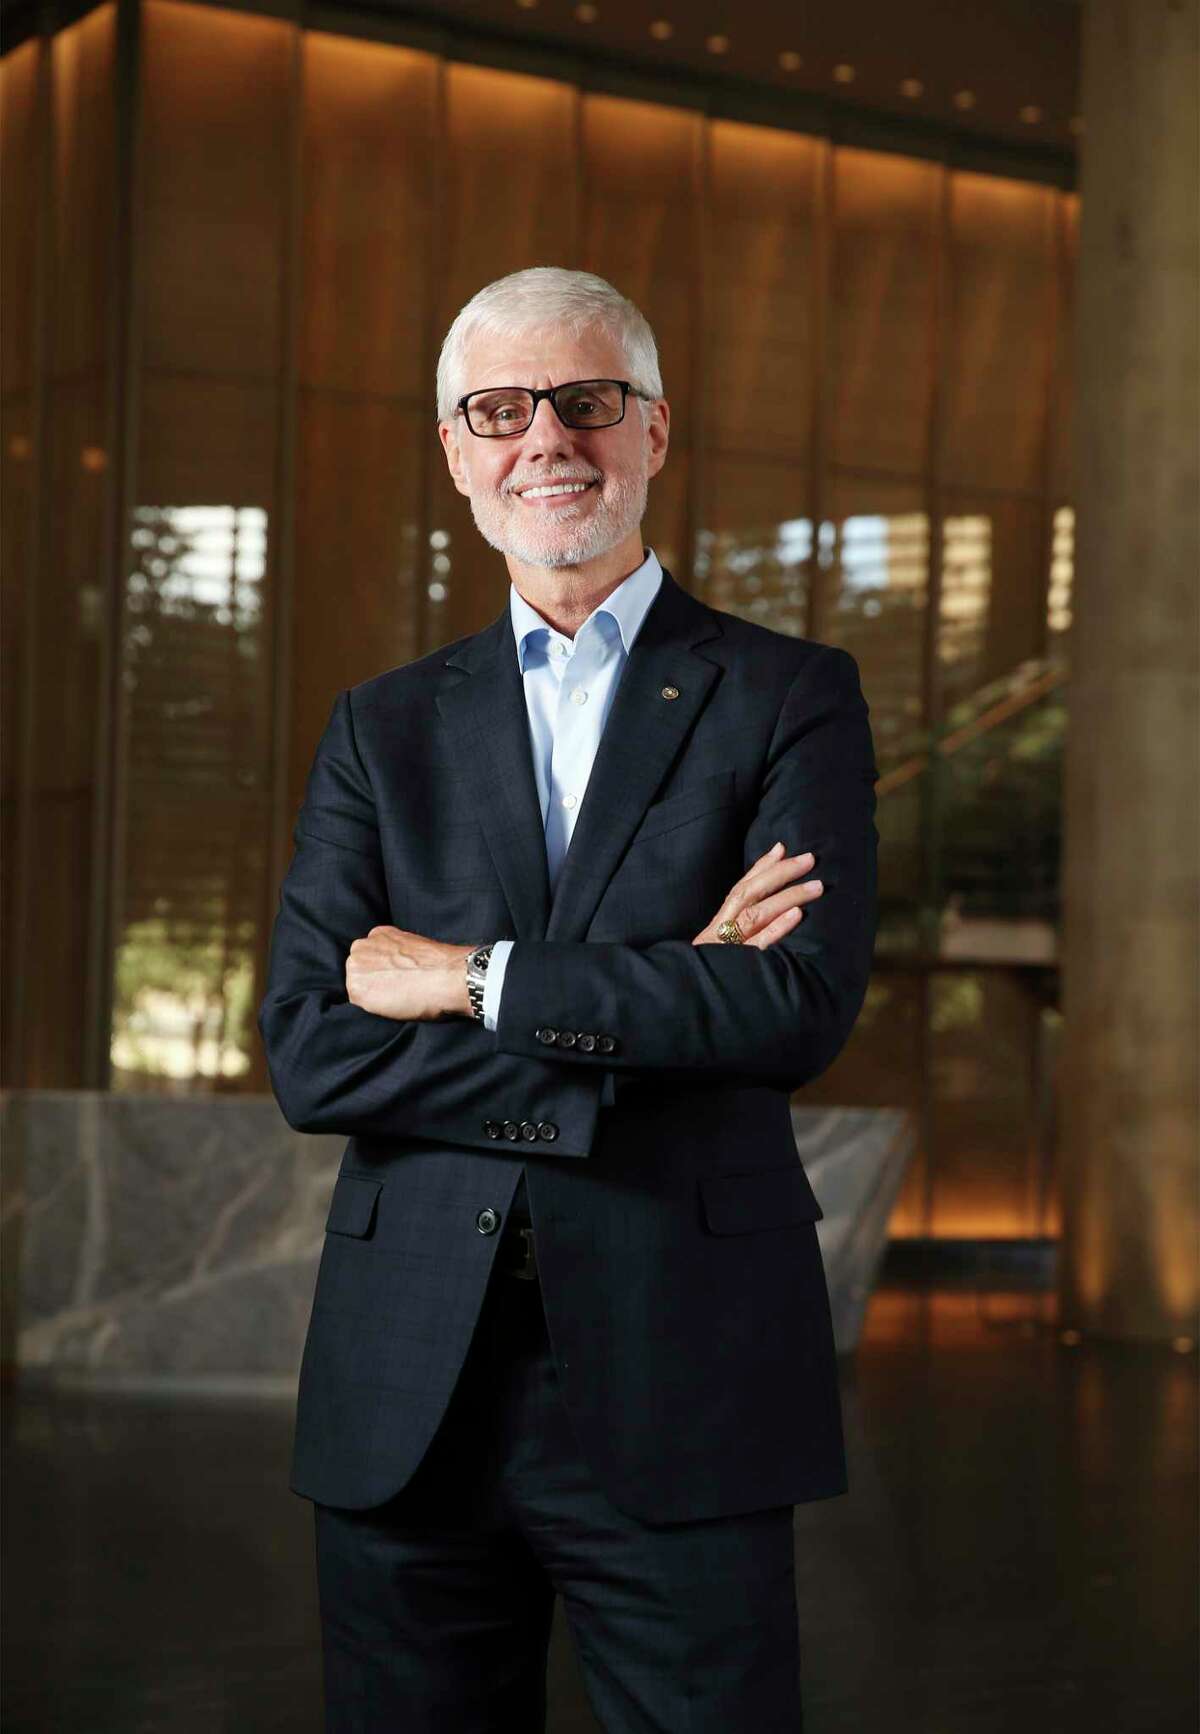 Portrait of Chairman and CEO of Cullen/Frost Bankers, Inc. Phil Green in the lobby of the new Frost Tower for Texas Power Brokers profile on Thursday, July 11, 2019. Green has lead Frost Bank since 2016. He has been with Cullen/Frost since 1980. (Kin Man Hui/San Antonio Express-News)